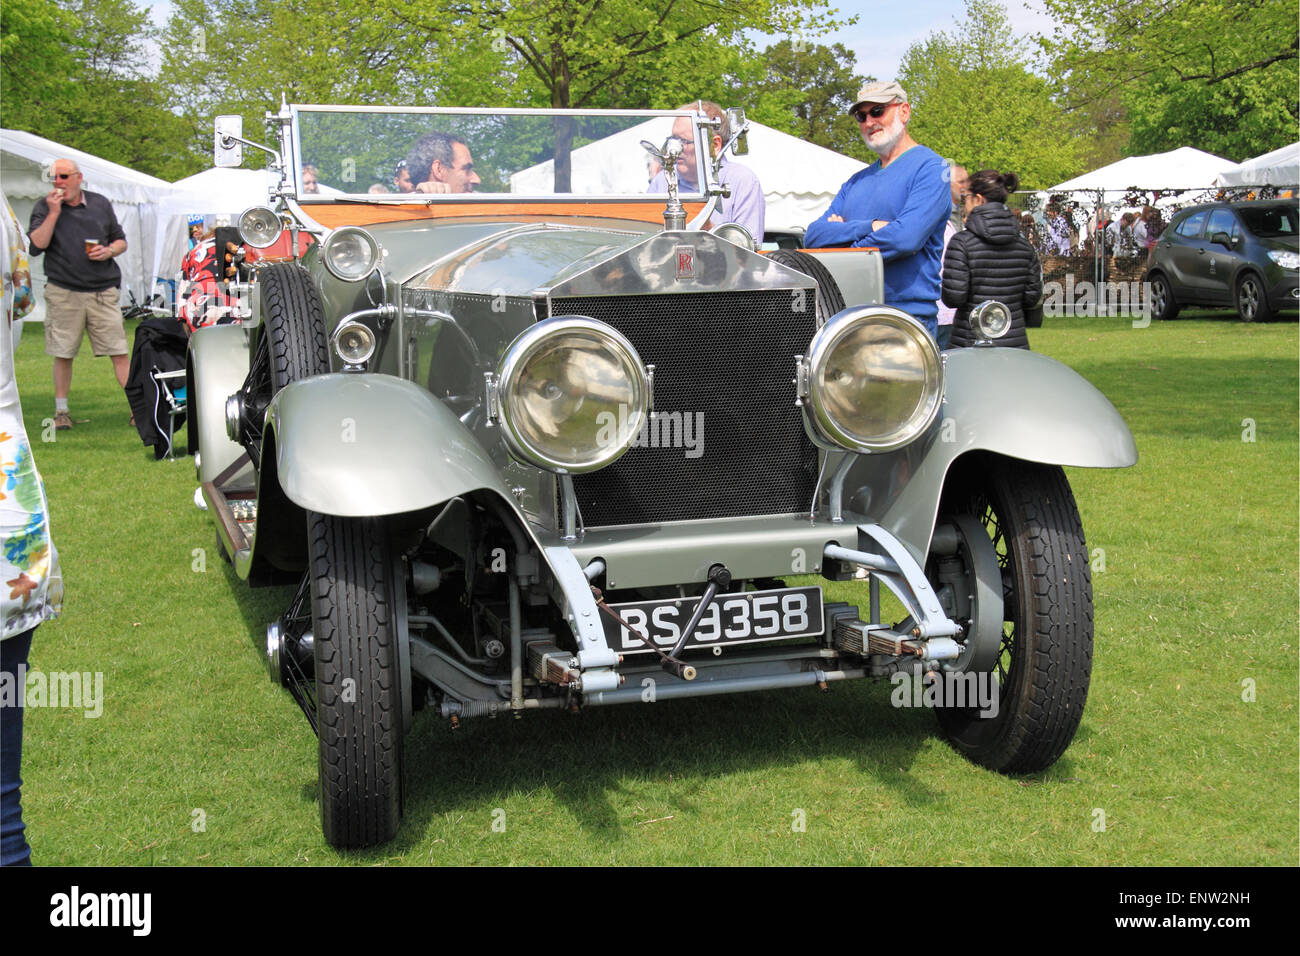 1924 Rolls-Royce Silver Ghost Tourer. Chestnut Sunday, 10th May 2015. Bushy Park, Hampton Court, London Borough of Richmond, England, Great Britain, United Kingdom, UK, Europe. Vintage and classic vehicle parade and displays with fairground attractions and military reenactments. Credit:  Ian Bottle / Alamy Live News Stock Photo